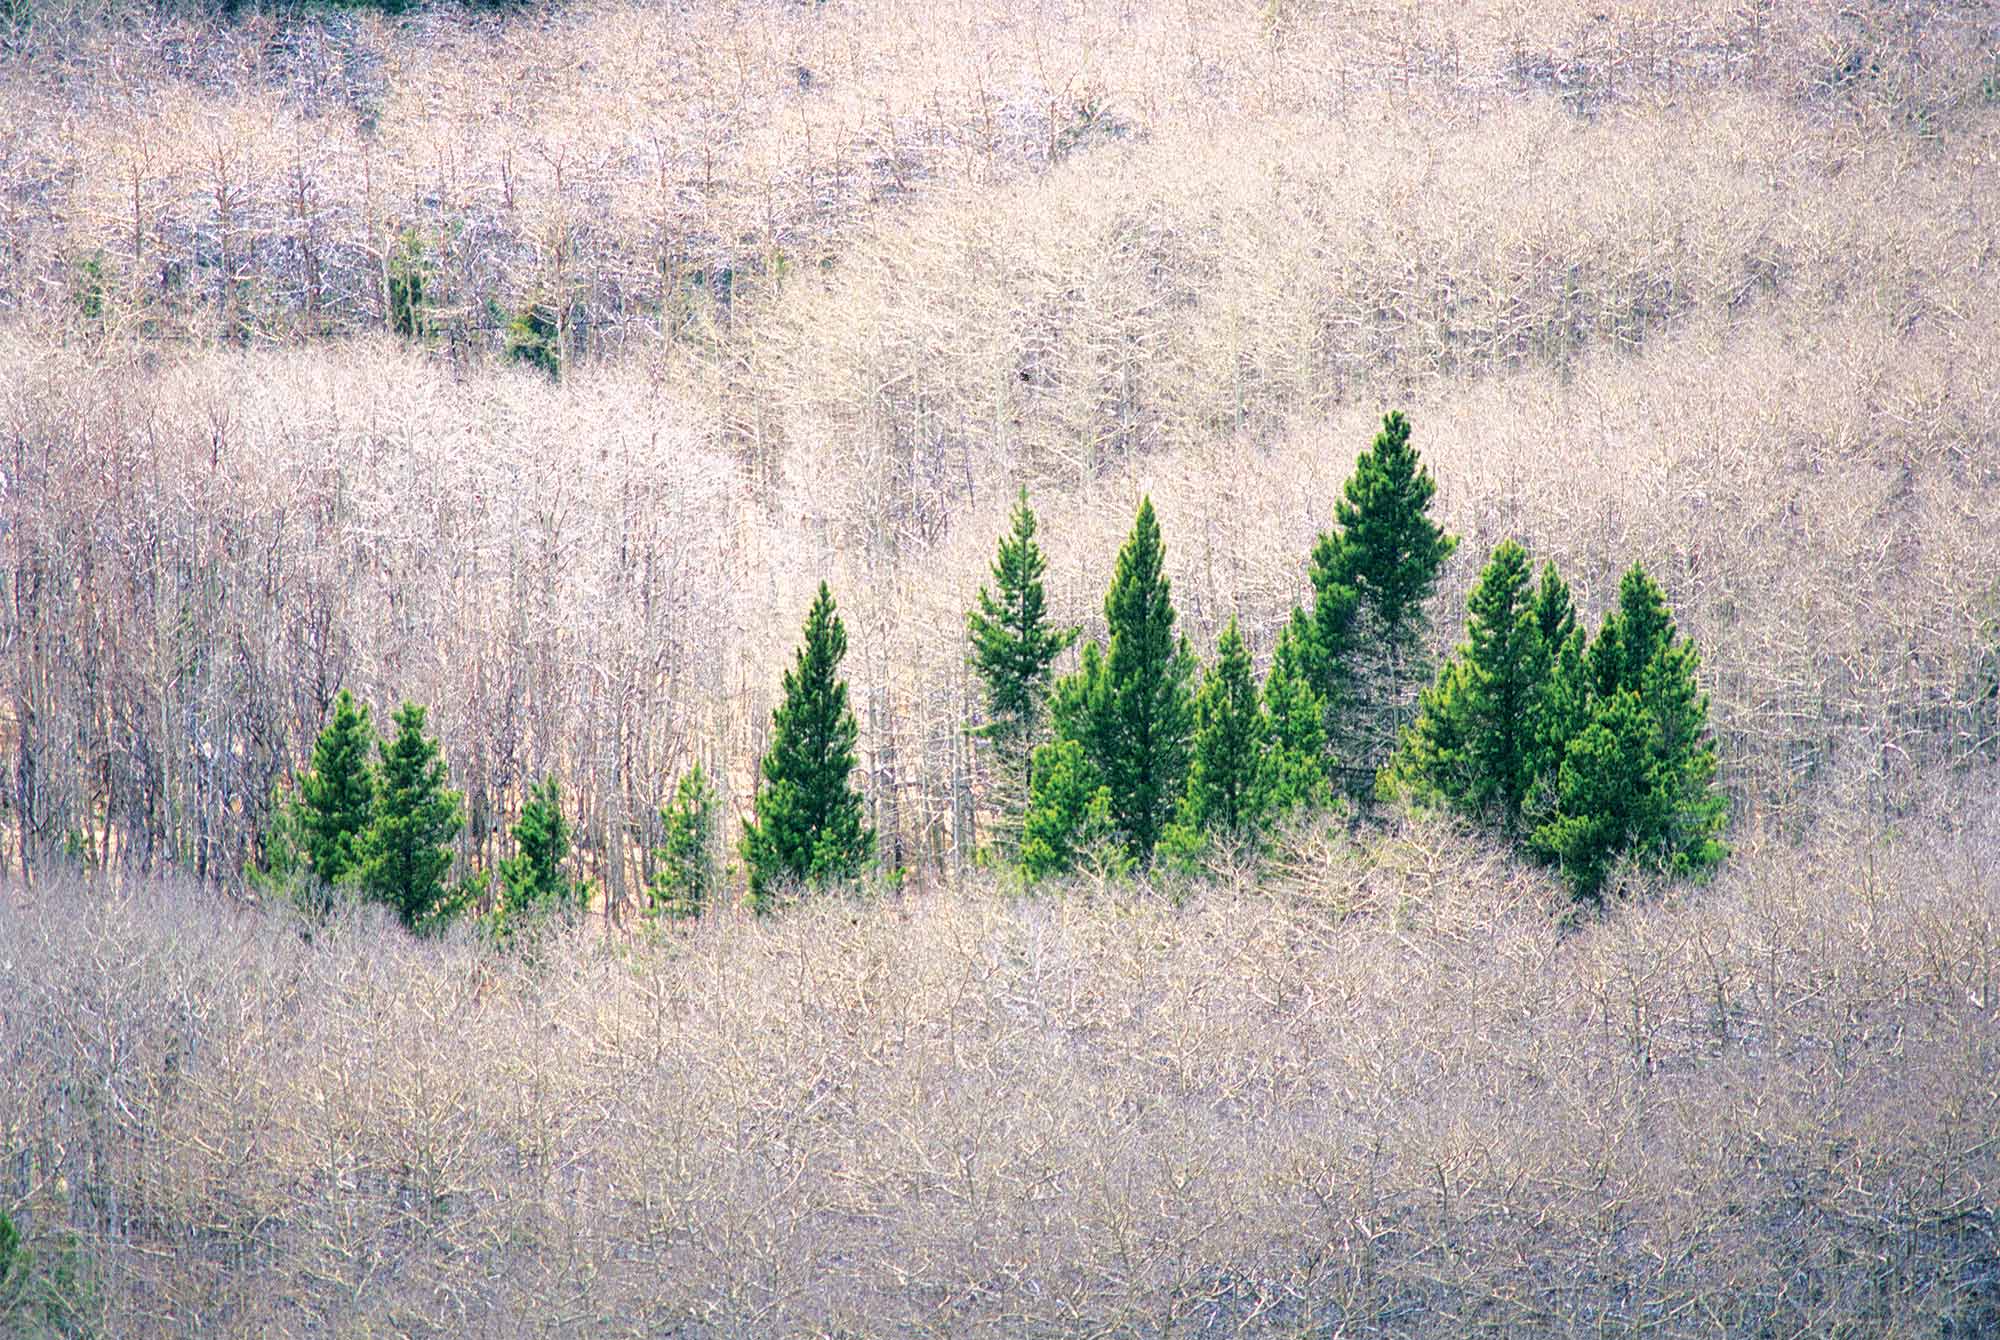 The skeleton of the forest is laid bare as aspen trees lose tgheir leaves leaving only the green of the pine trees along Colorado's Peak to Peak Scenic Byway in Lariner County.